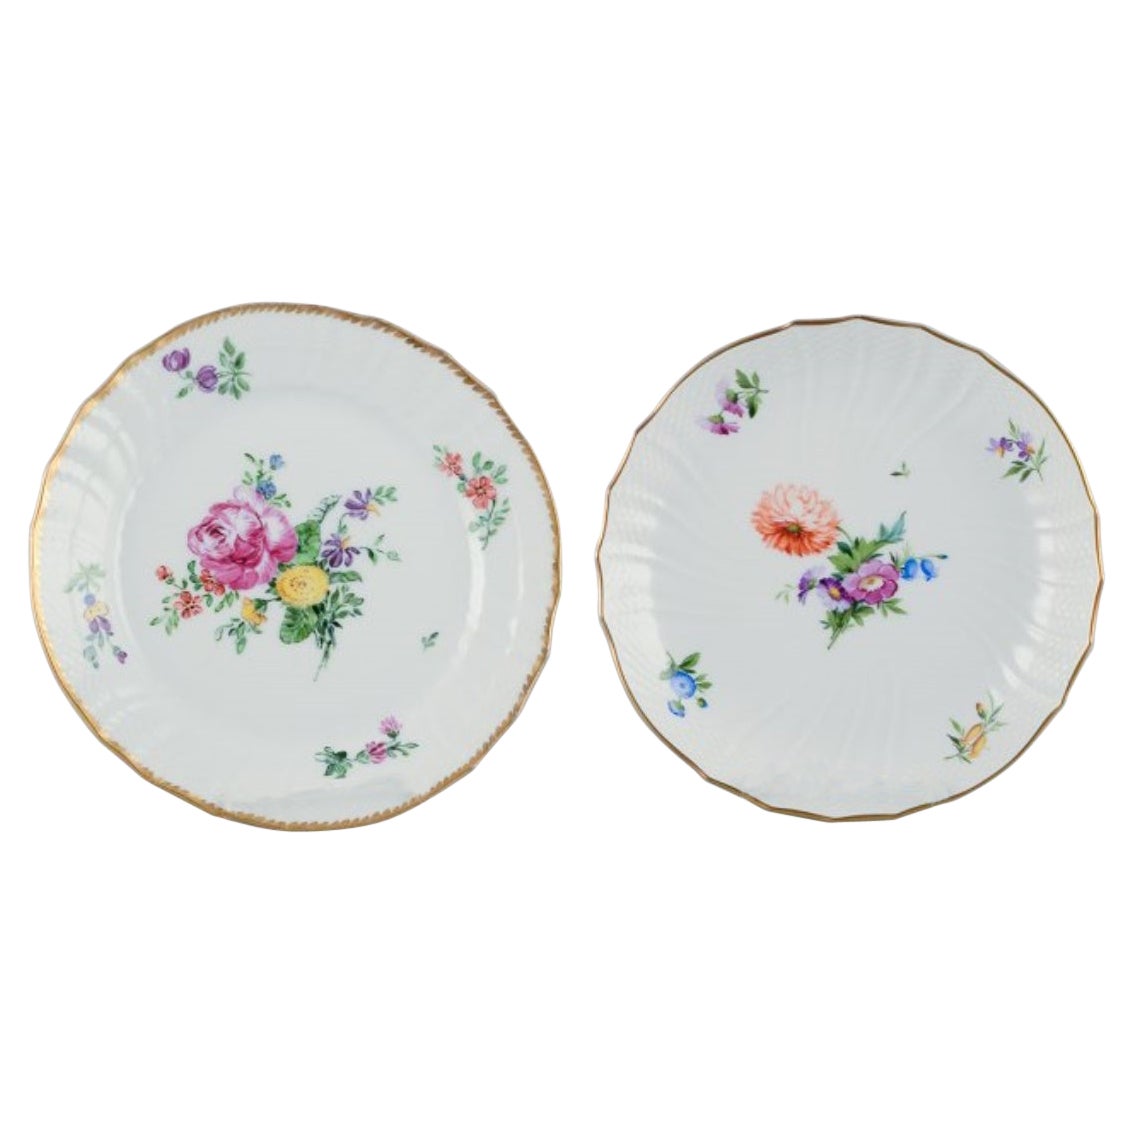 Royal Copenhagen, Saxon Flower, a plate and a low bowl with flowers For Sale